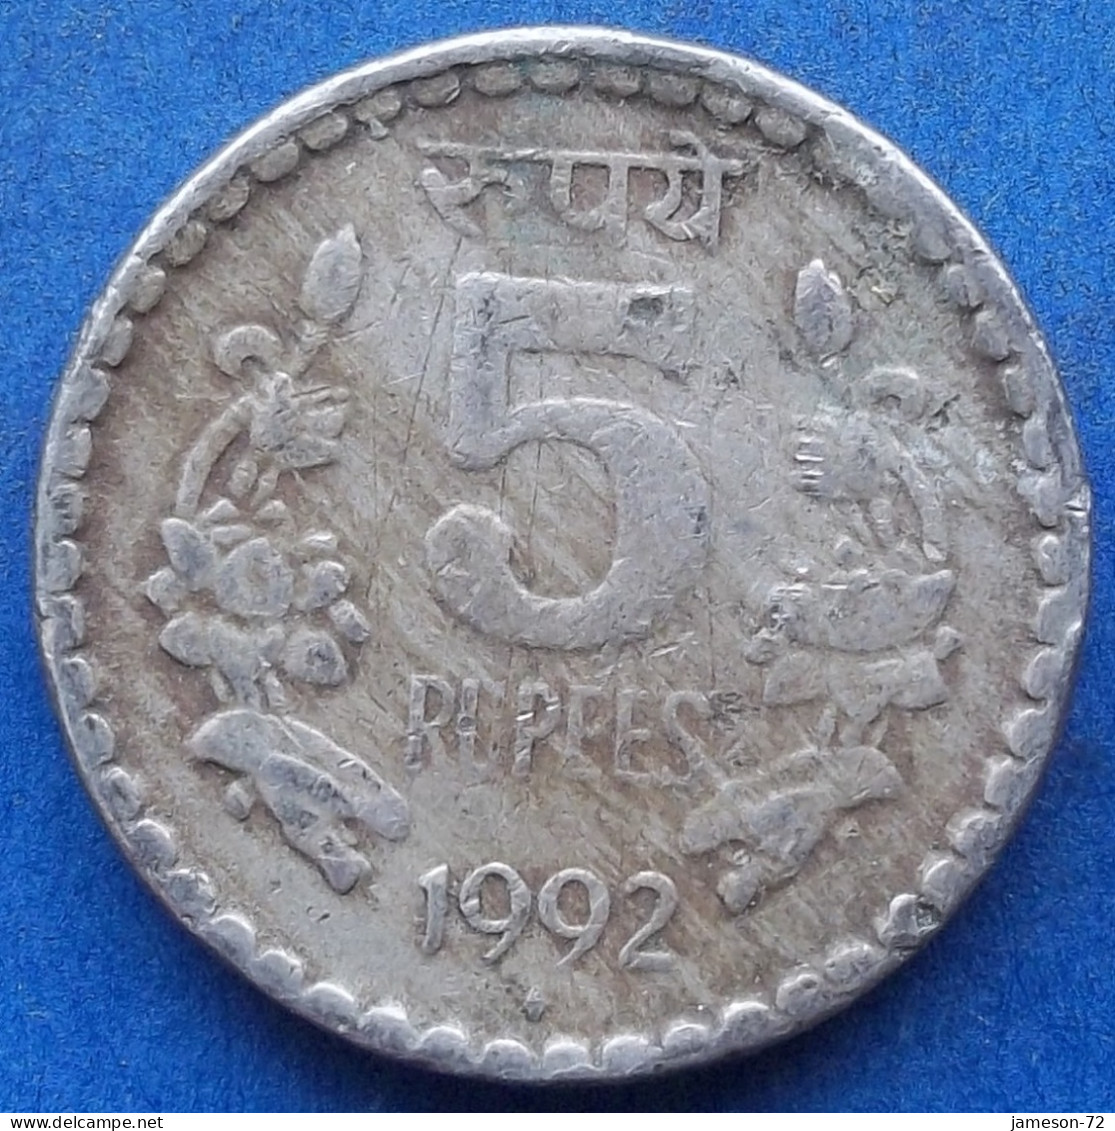 INDIA - 5 Rupees 1992 "Lotus Flowers" KM# 154.1 Republic Decimal Coinage (1957) - Edelweiss Coins - Georgië